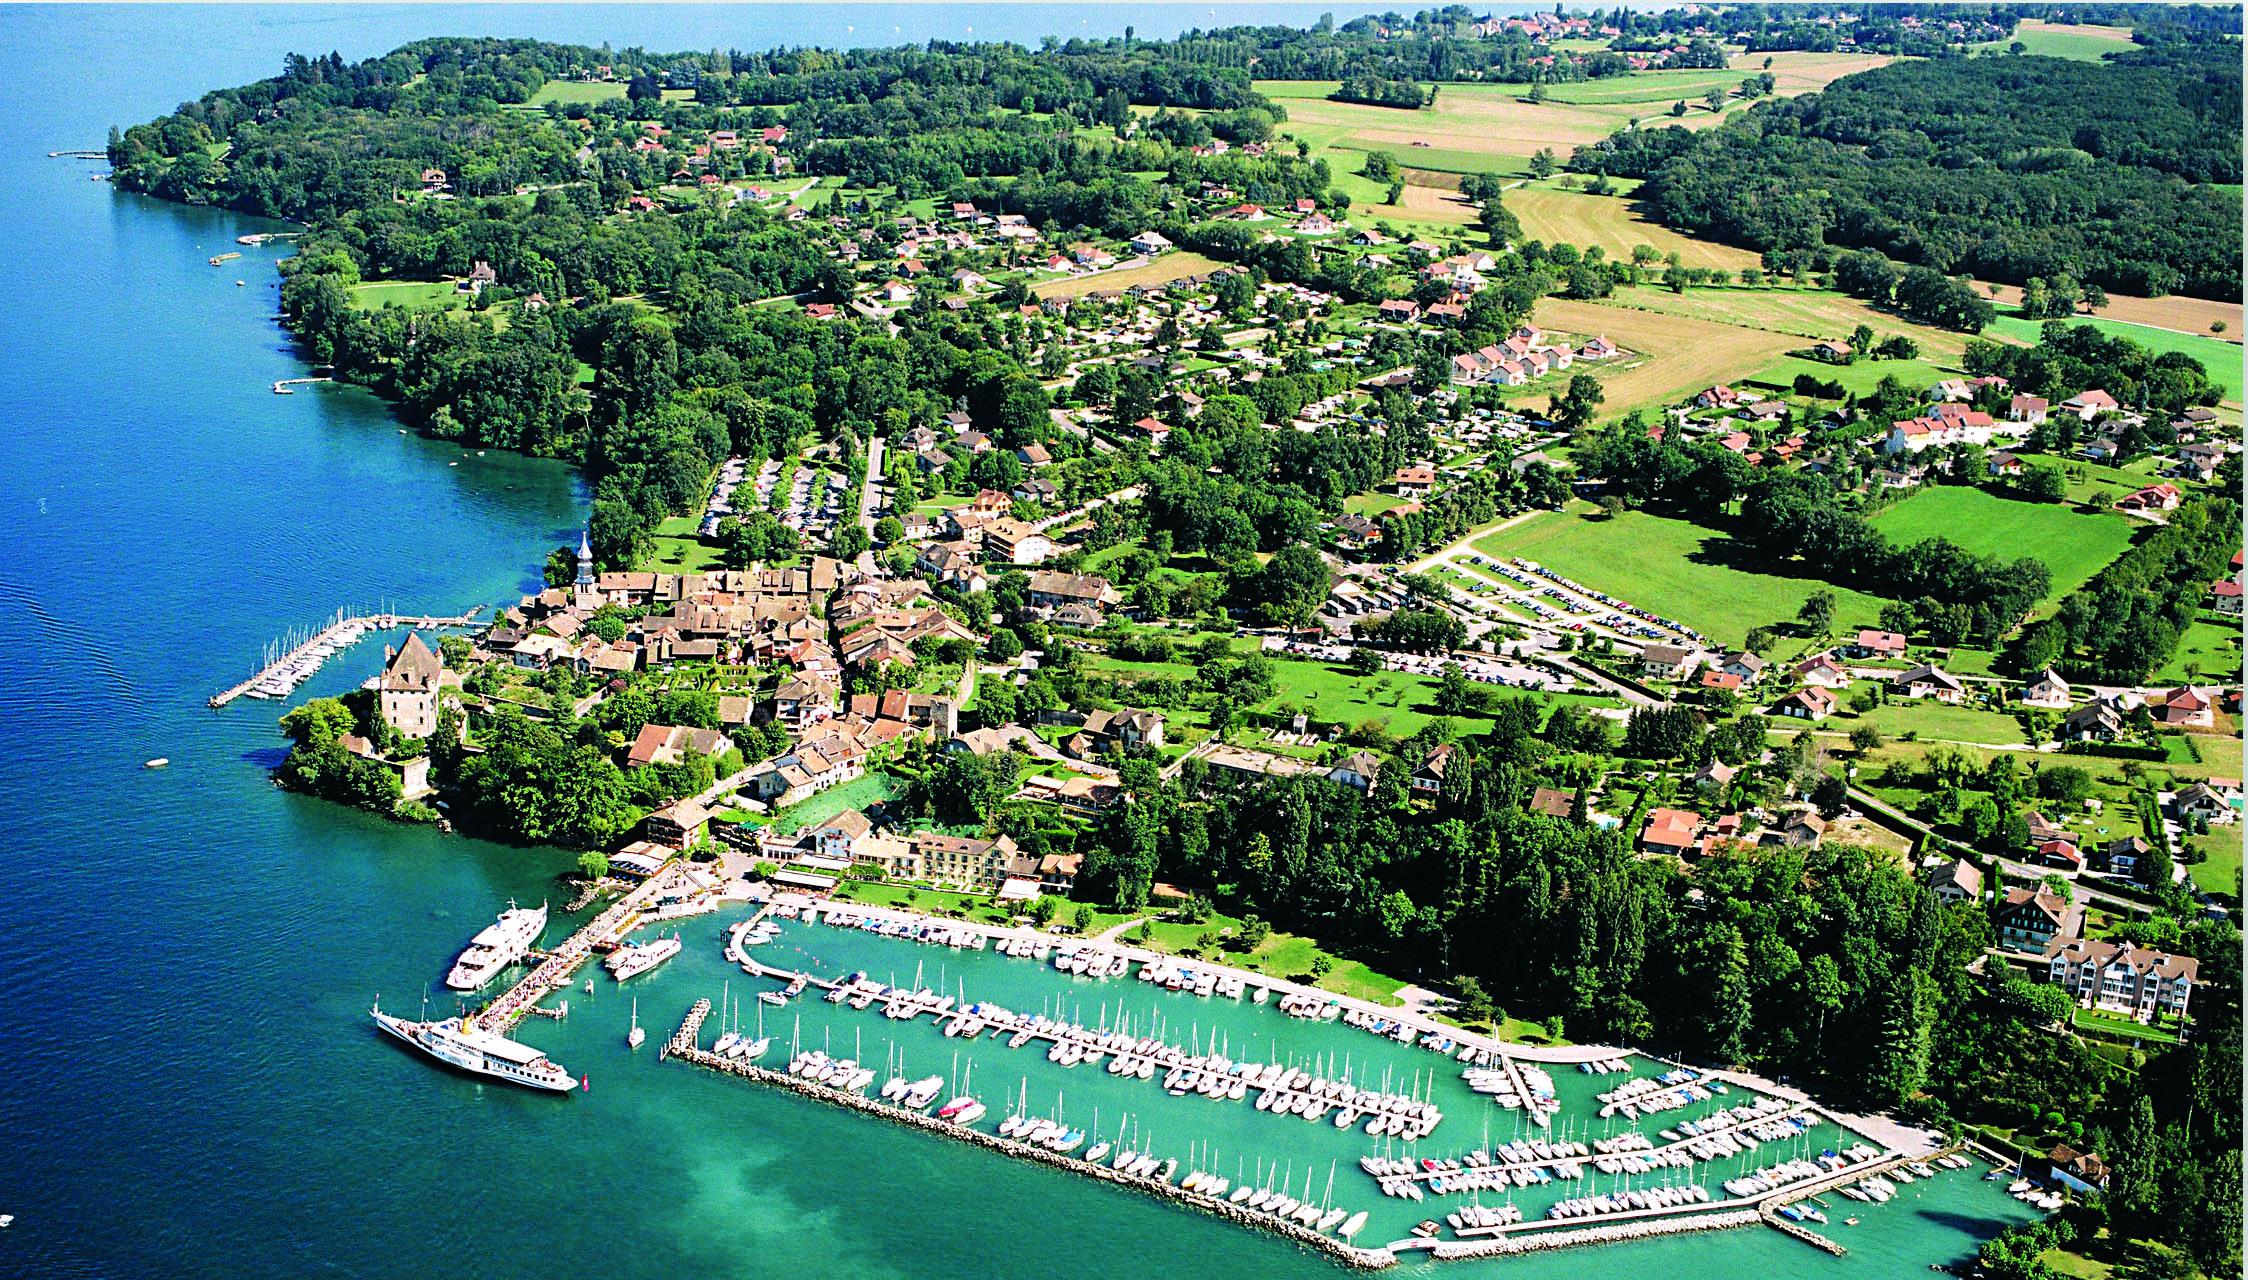 Aerial view of the French village Yvoire on Lake Geneva